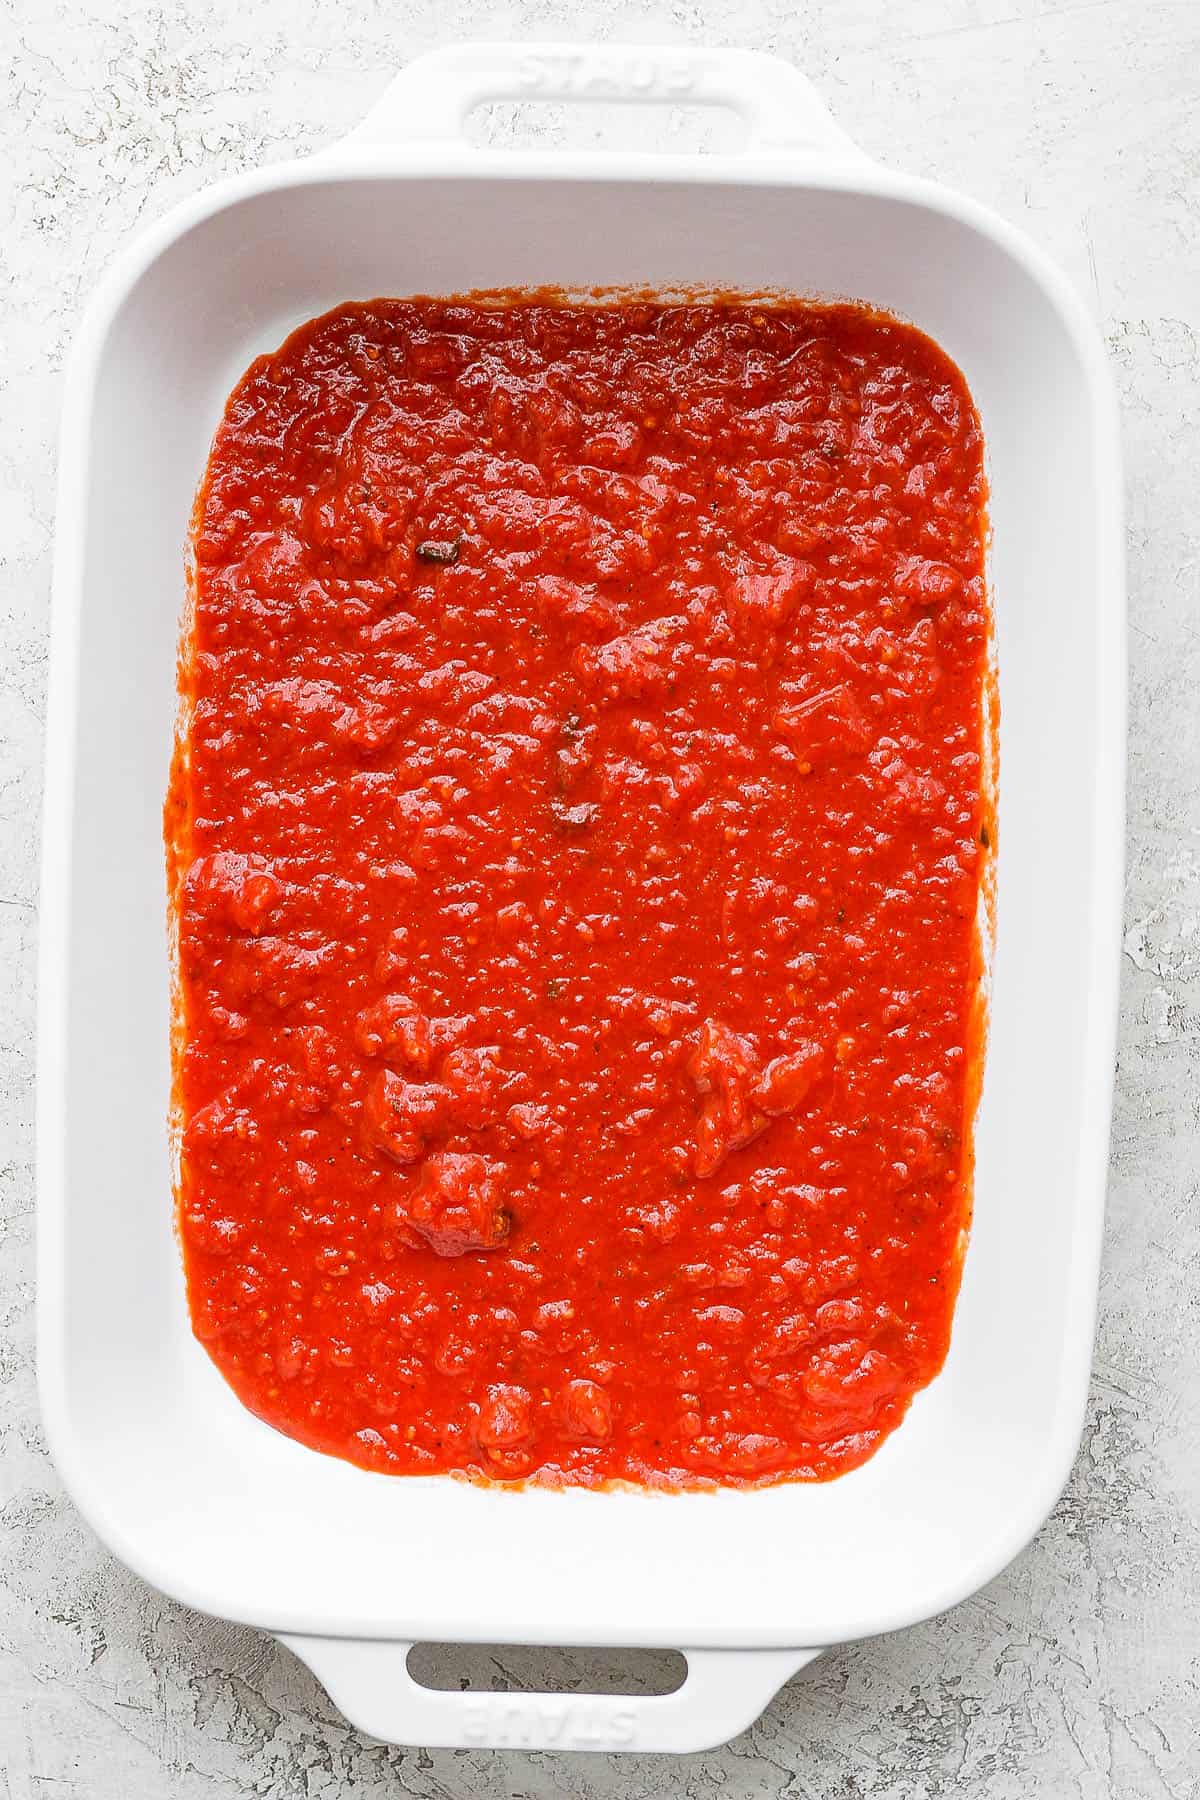 Half of the meat sauce placed in a 9x13 baking dish. 